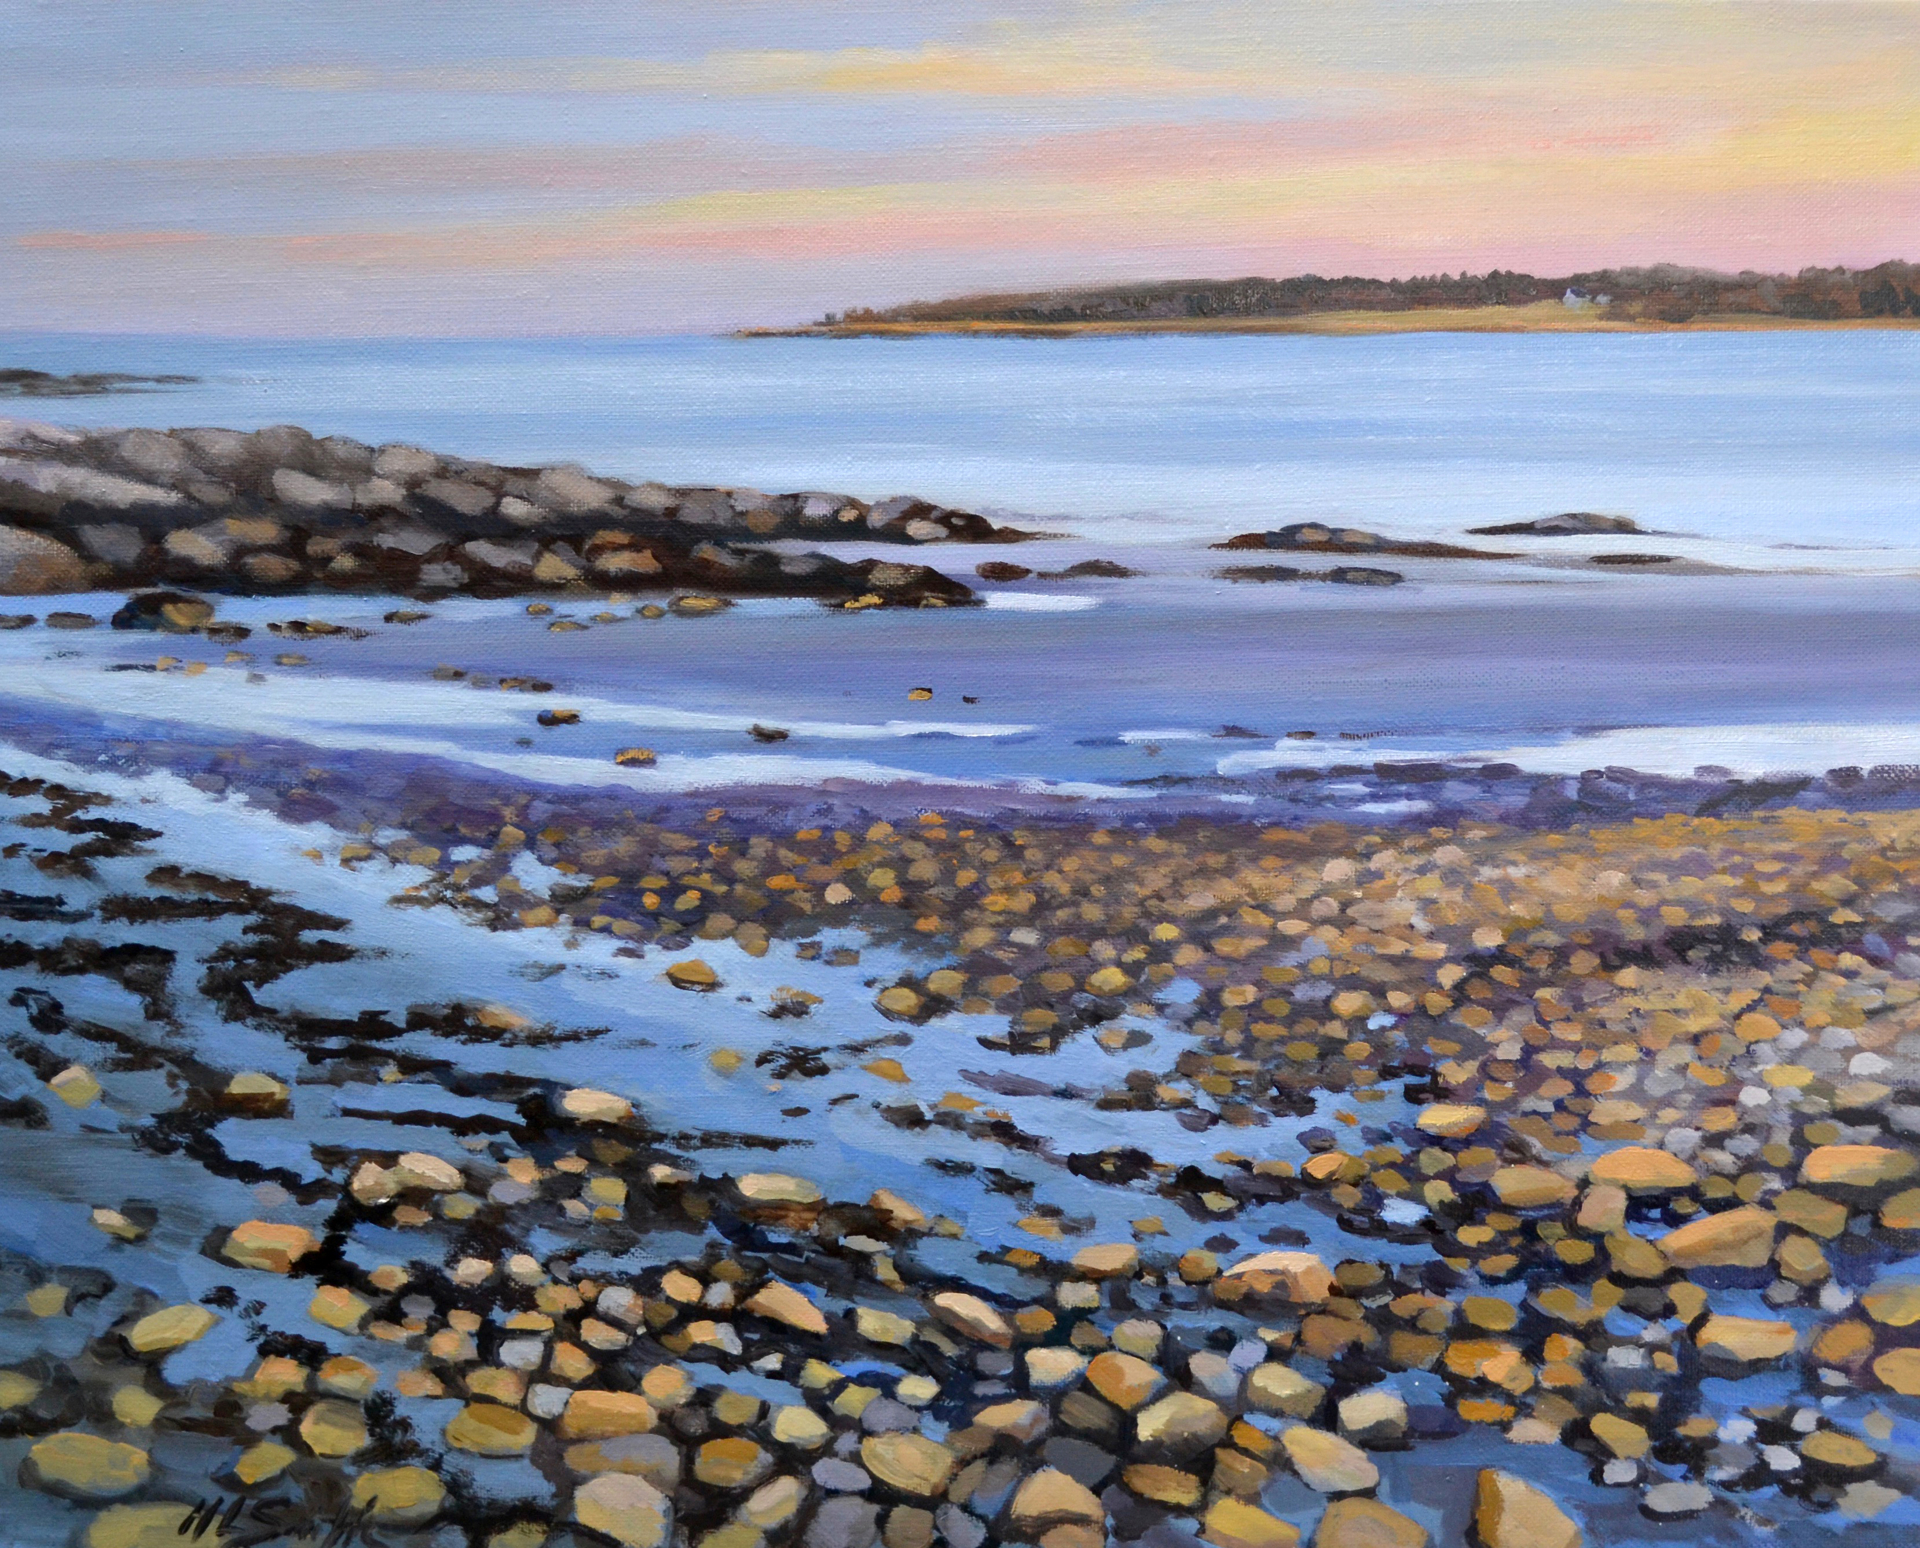 Low Tide At Sunset by Holly L. Smith